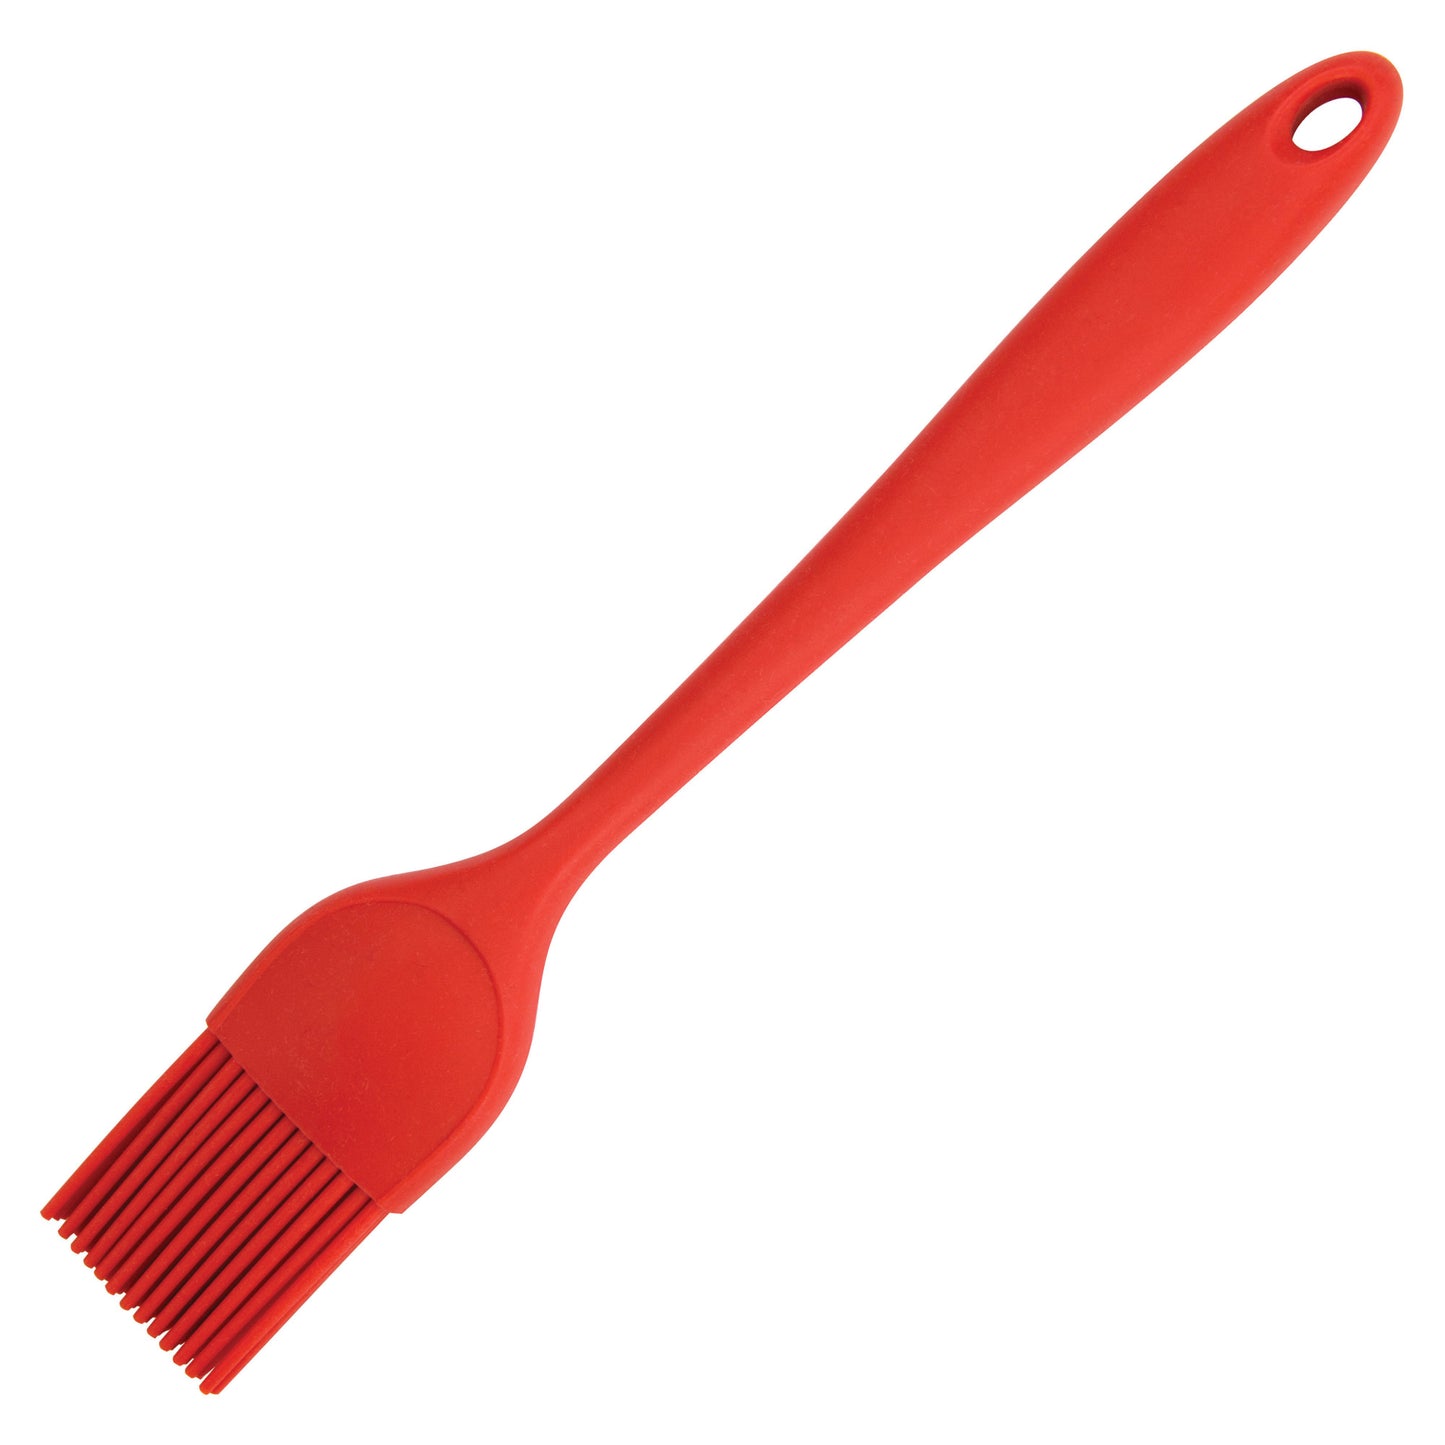 SB-175R - Silicone Brush, 1-3/4" Wide, Red